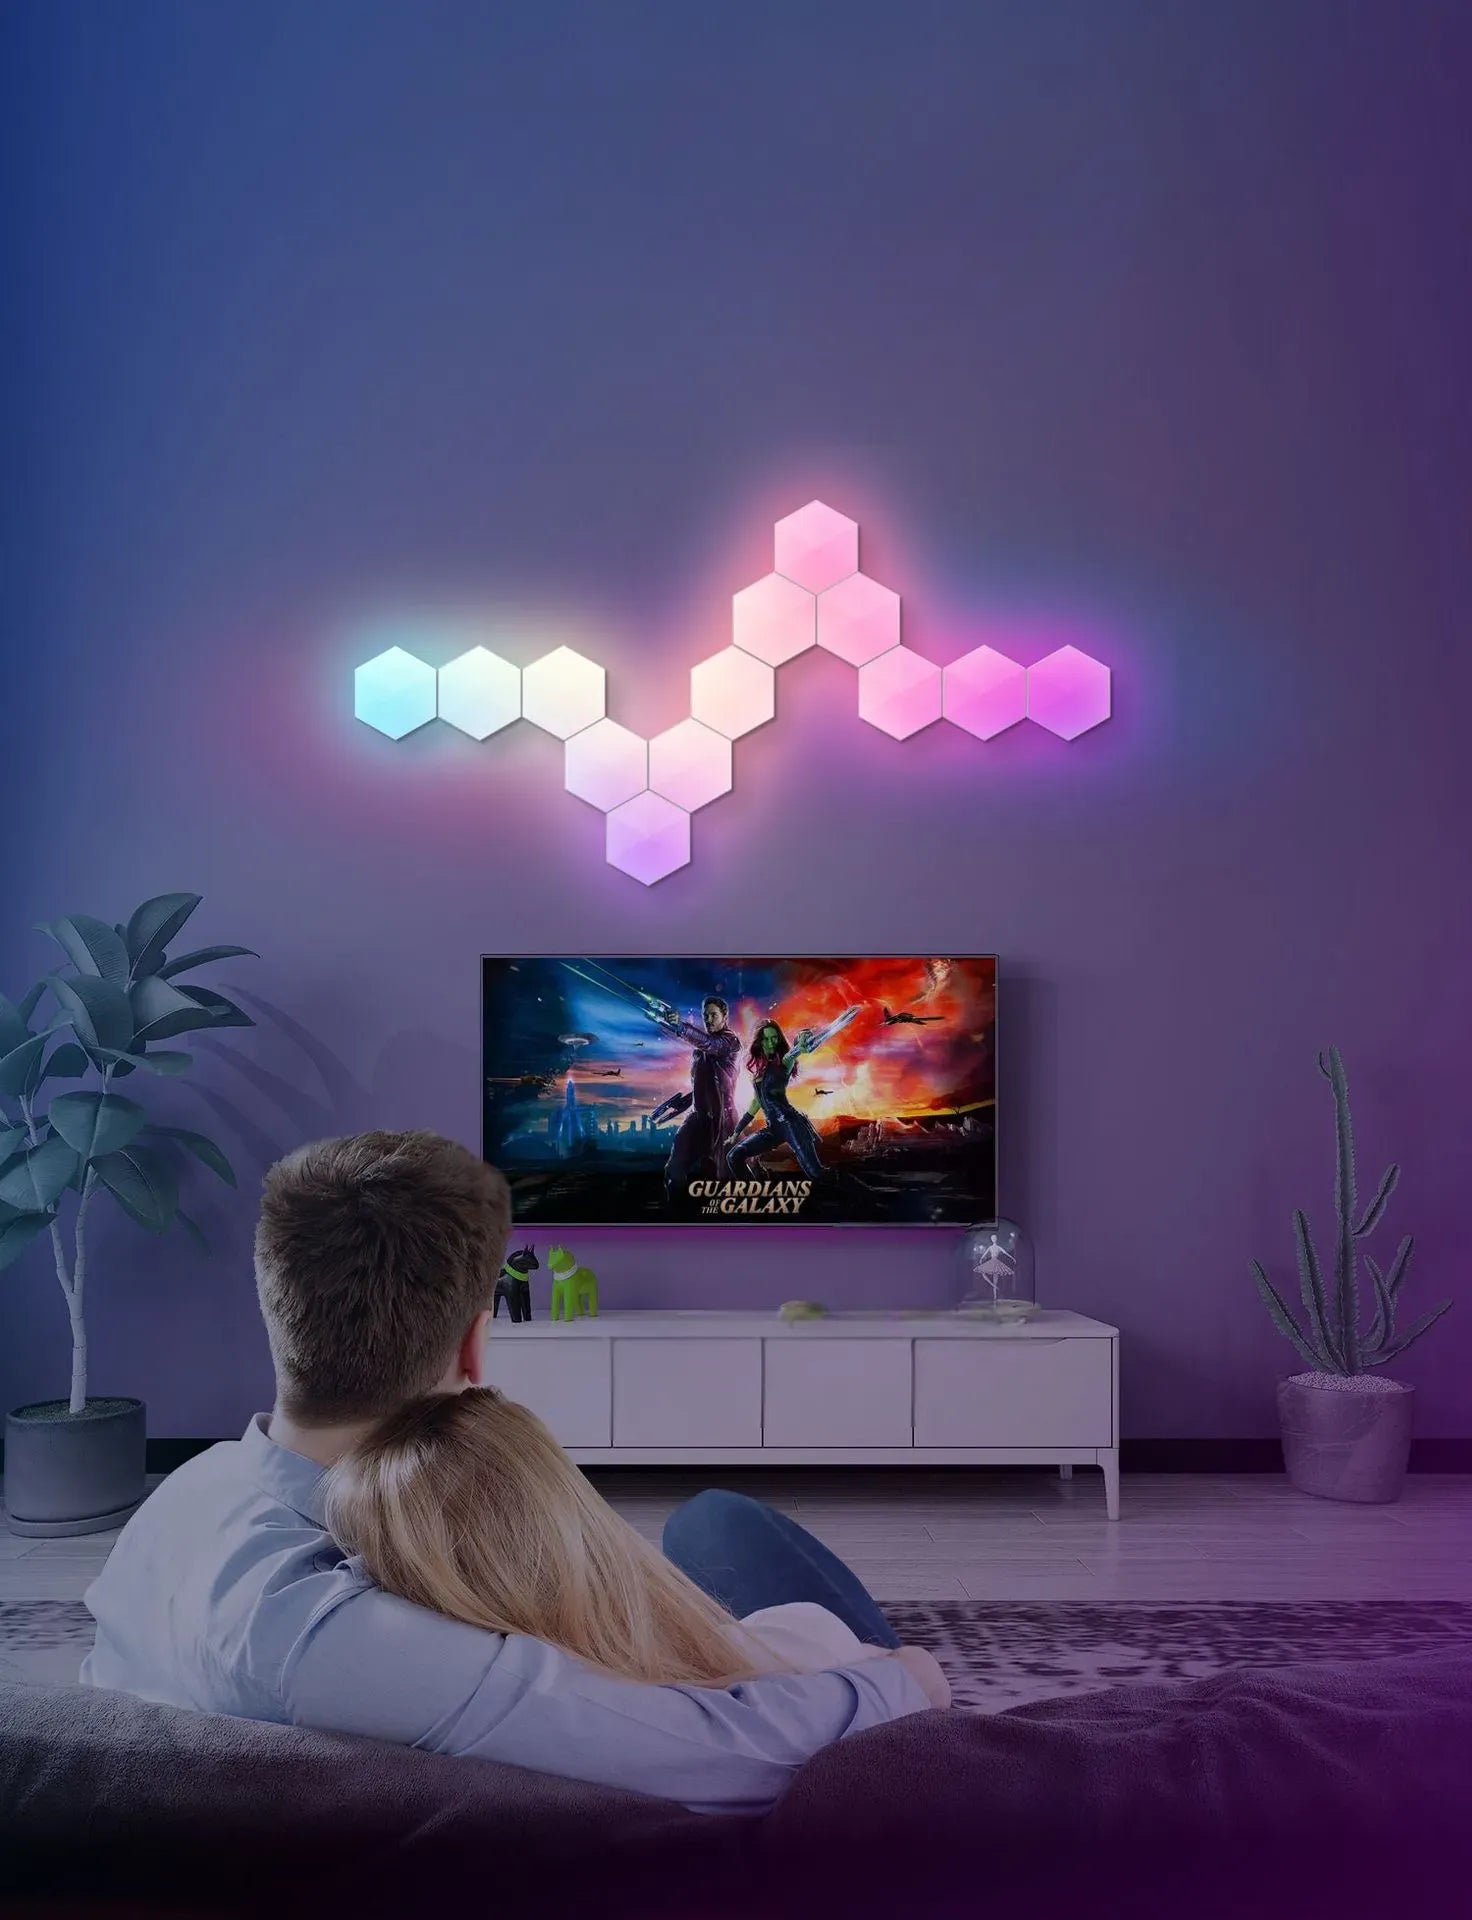 Customizable LED Wall Lights | Neon RGB Colours Available